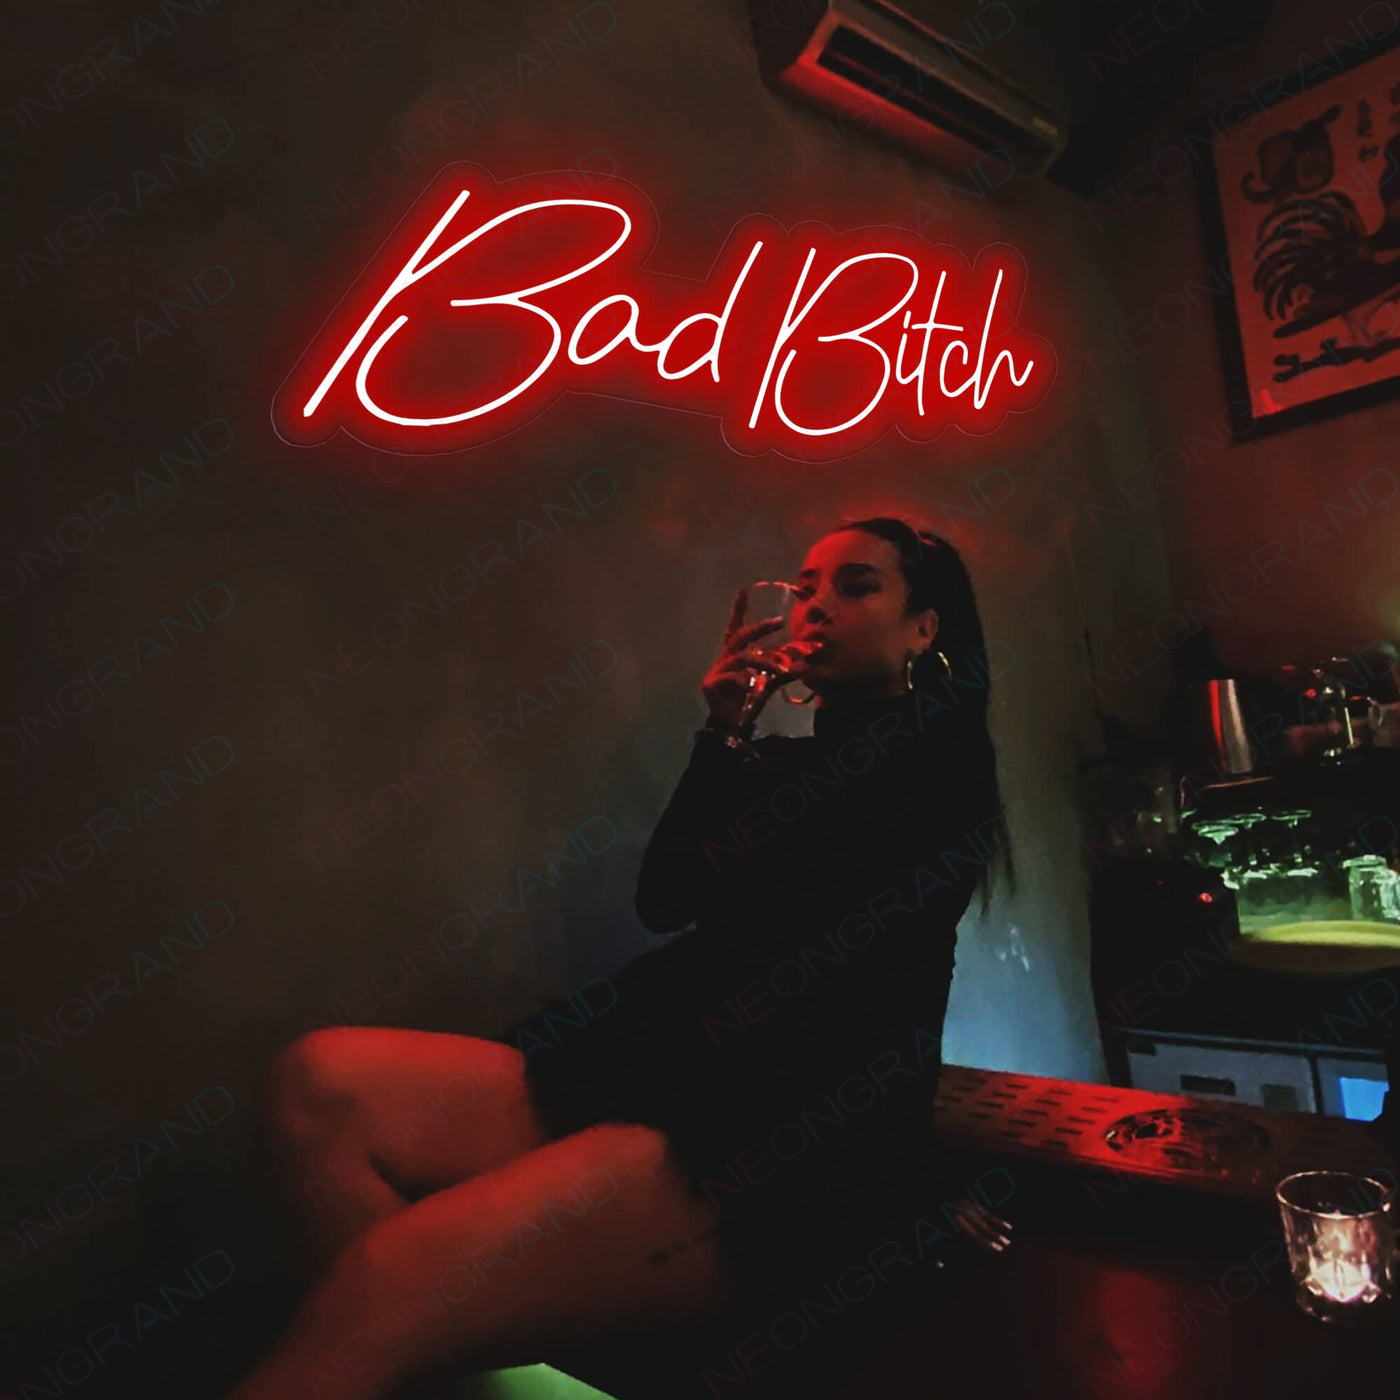 Bad Bitch Neon Sign Aesthetic Led Light Red